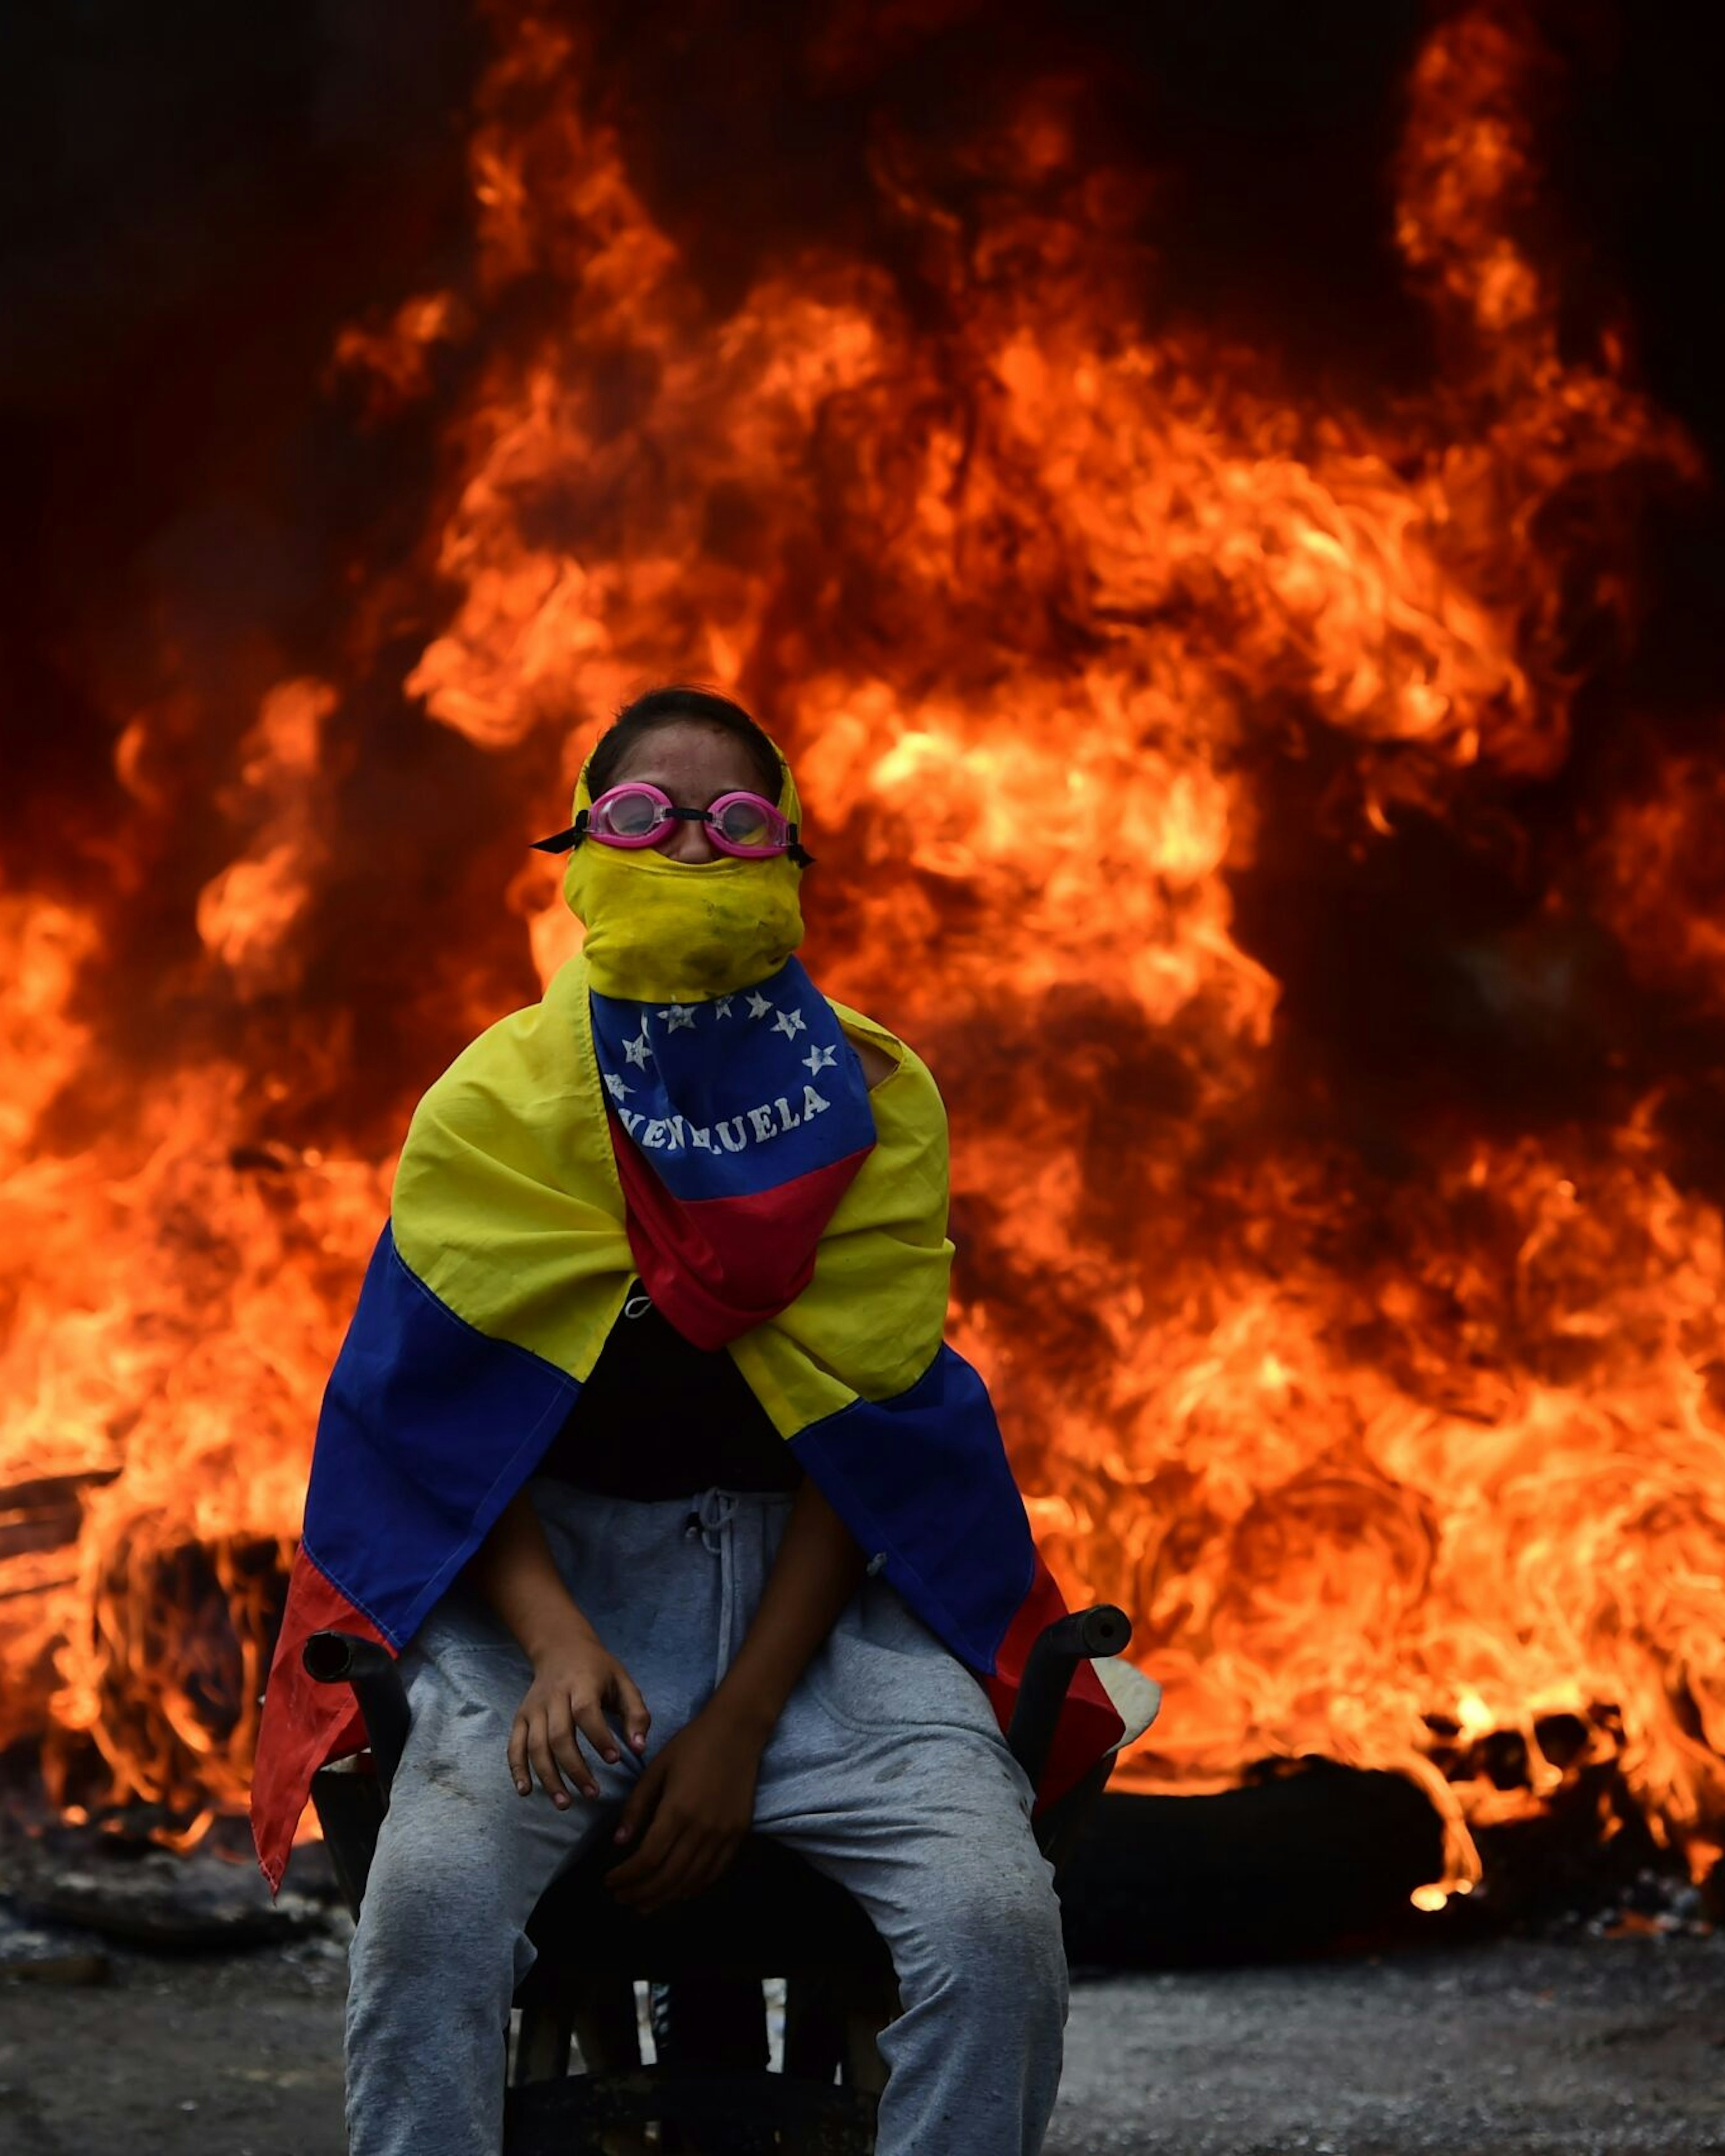 TOPSHOT - A Venezuelan opposition activist is backdropped by a burning barricade during a demonstration against President Nicolas Maduro in Caracas, on April 24, 2017.